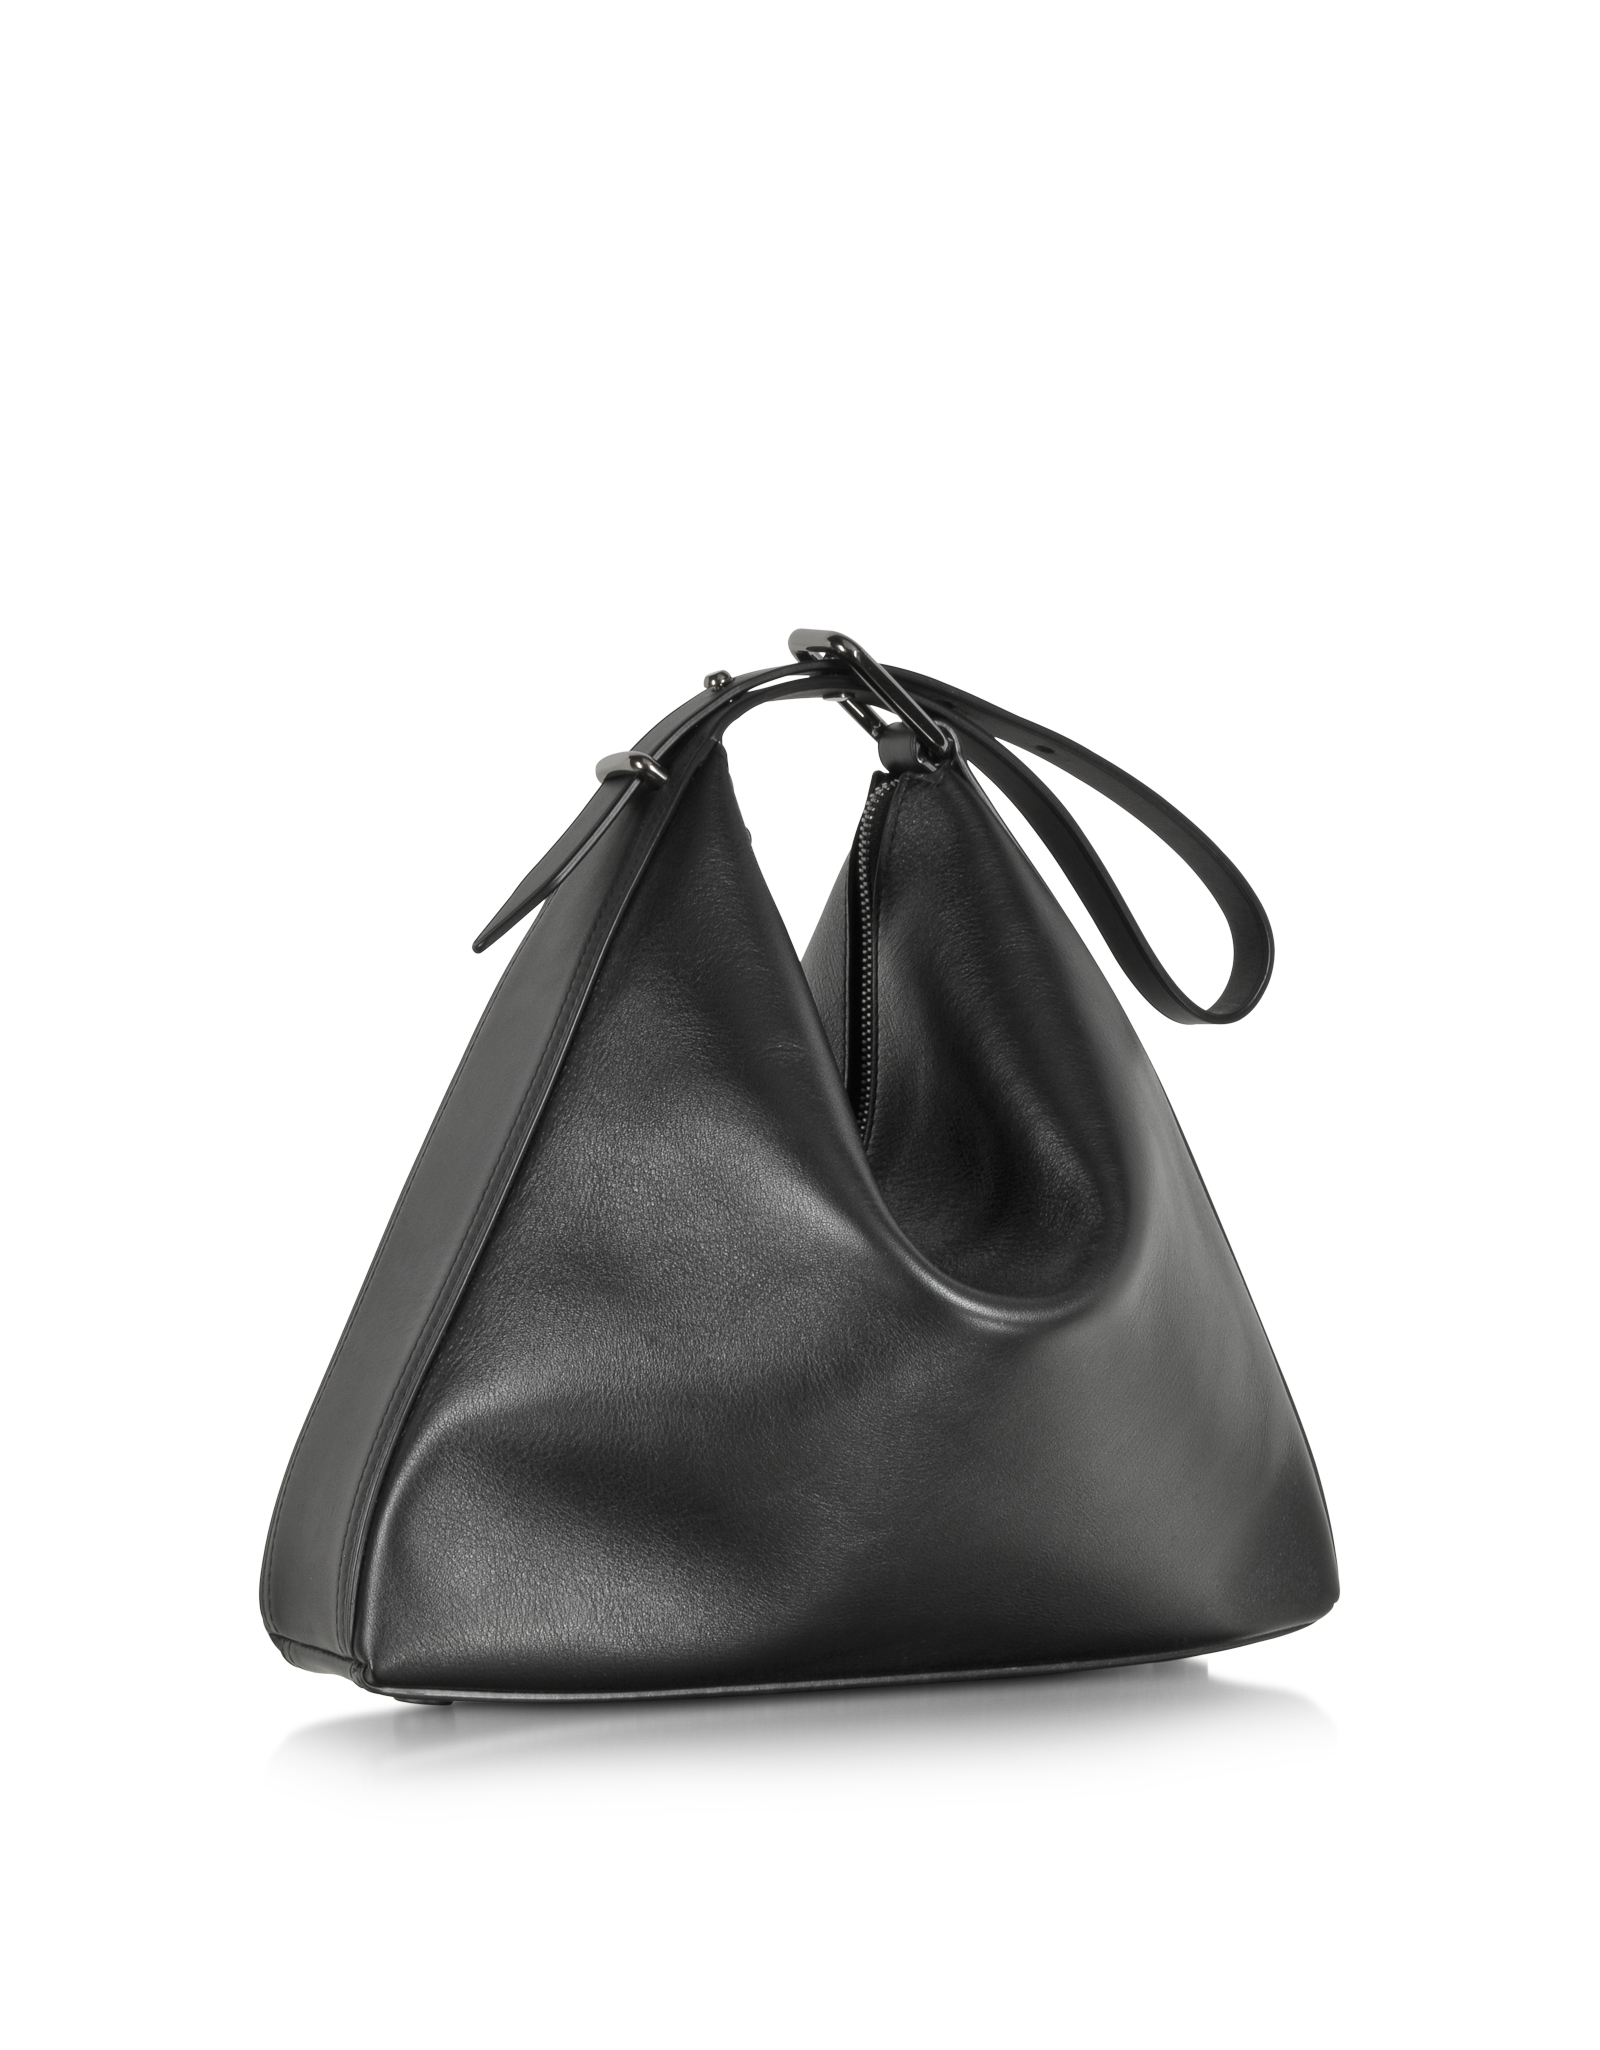 Lyst - 3.1 Phillip Lim Quill Triangle Bag in Black